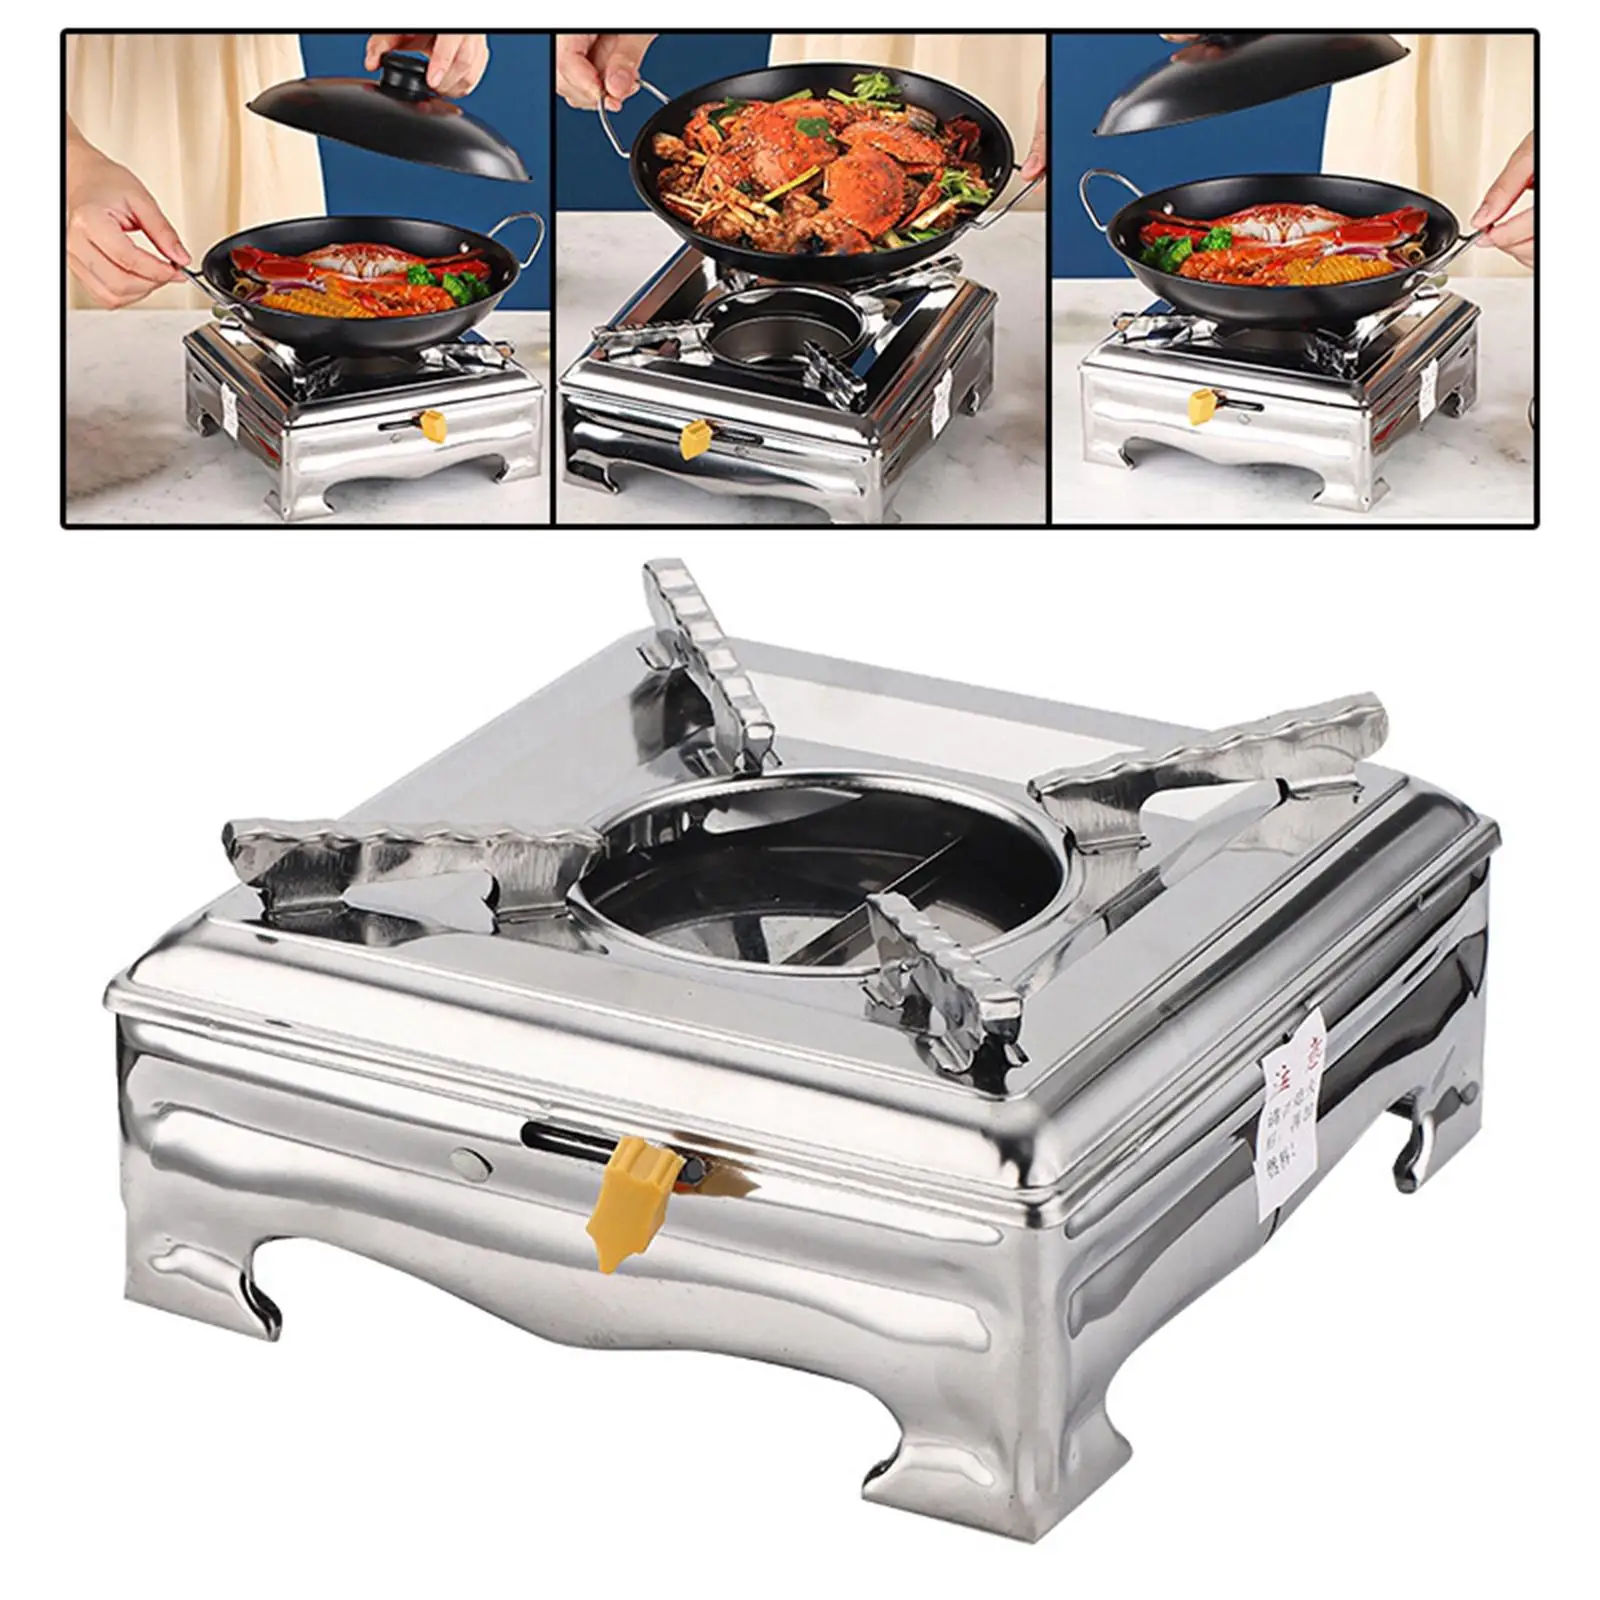 Alcohol Stove with Lid with Cover Environmental Protection Lightweight Burner